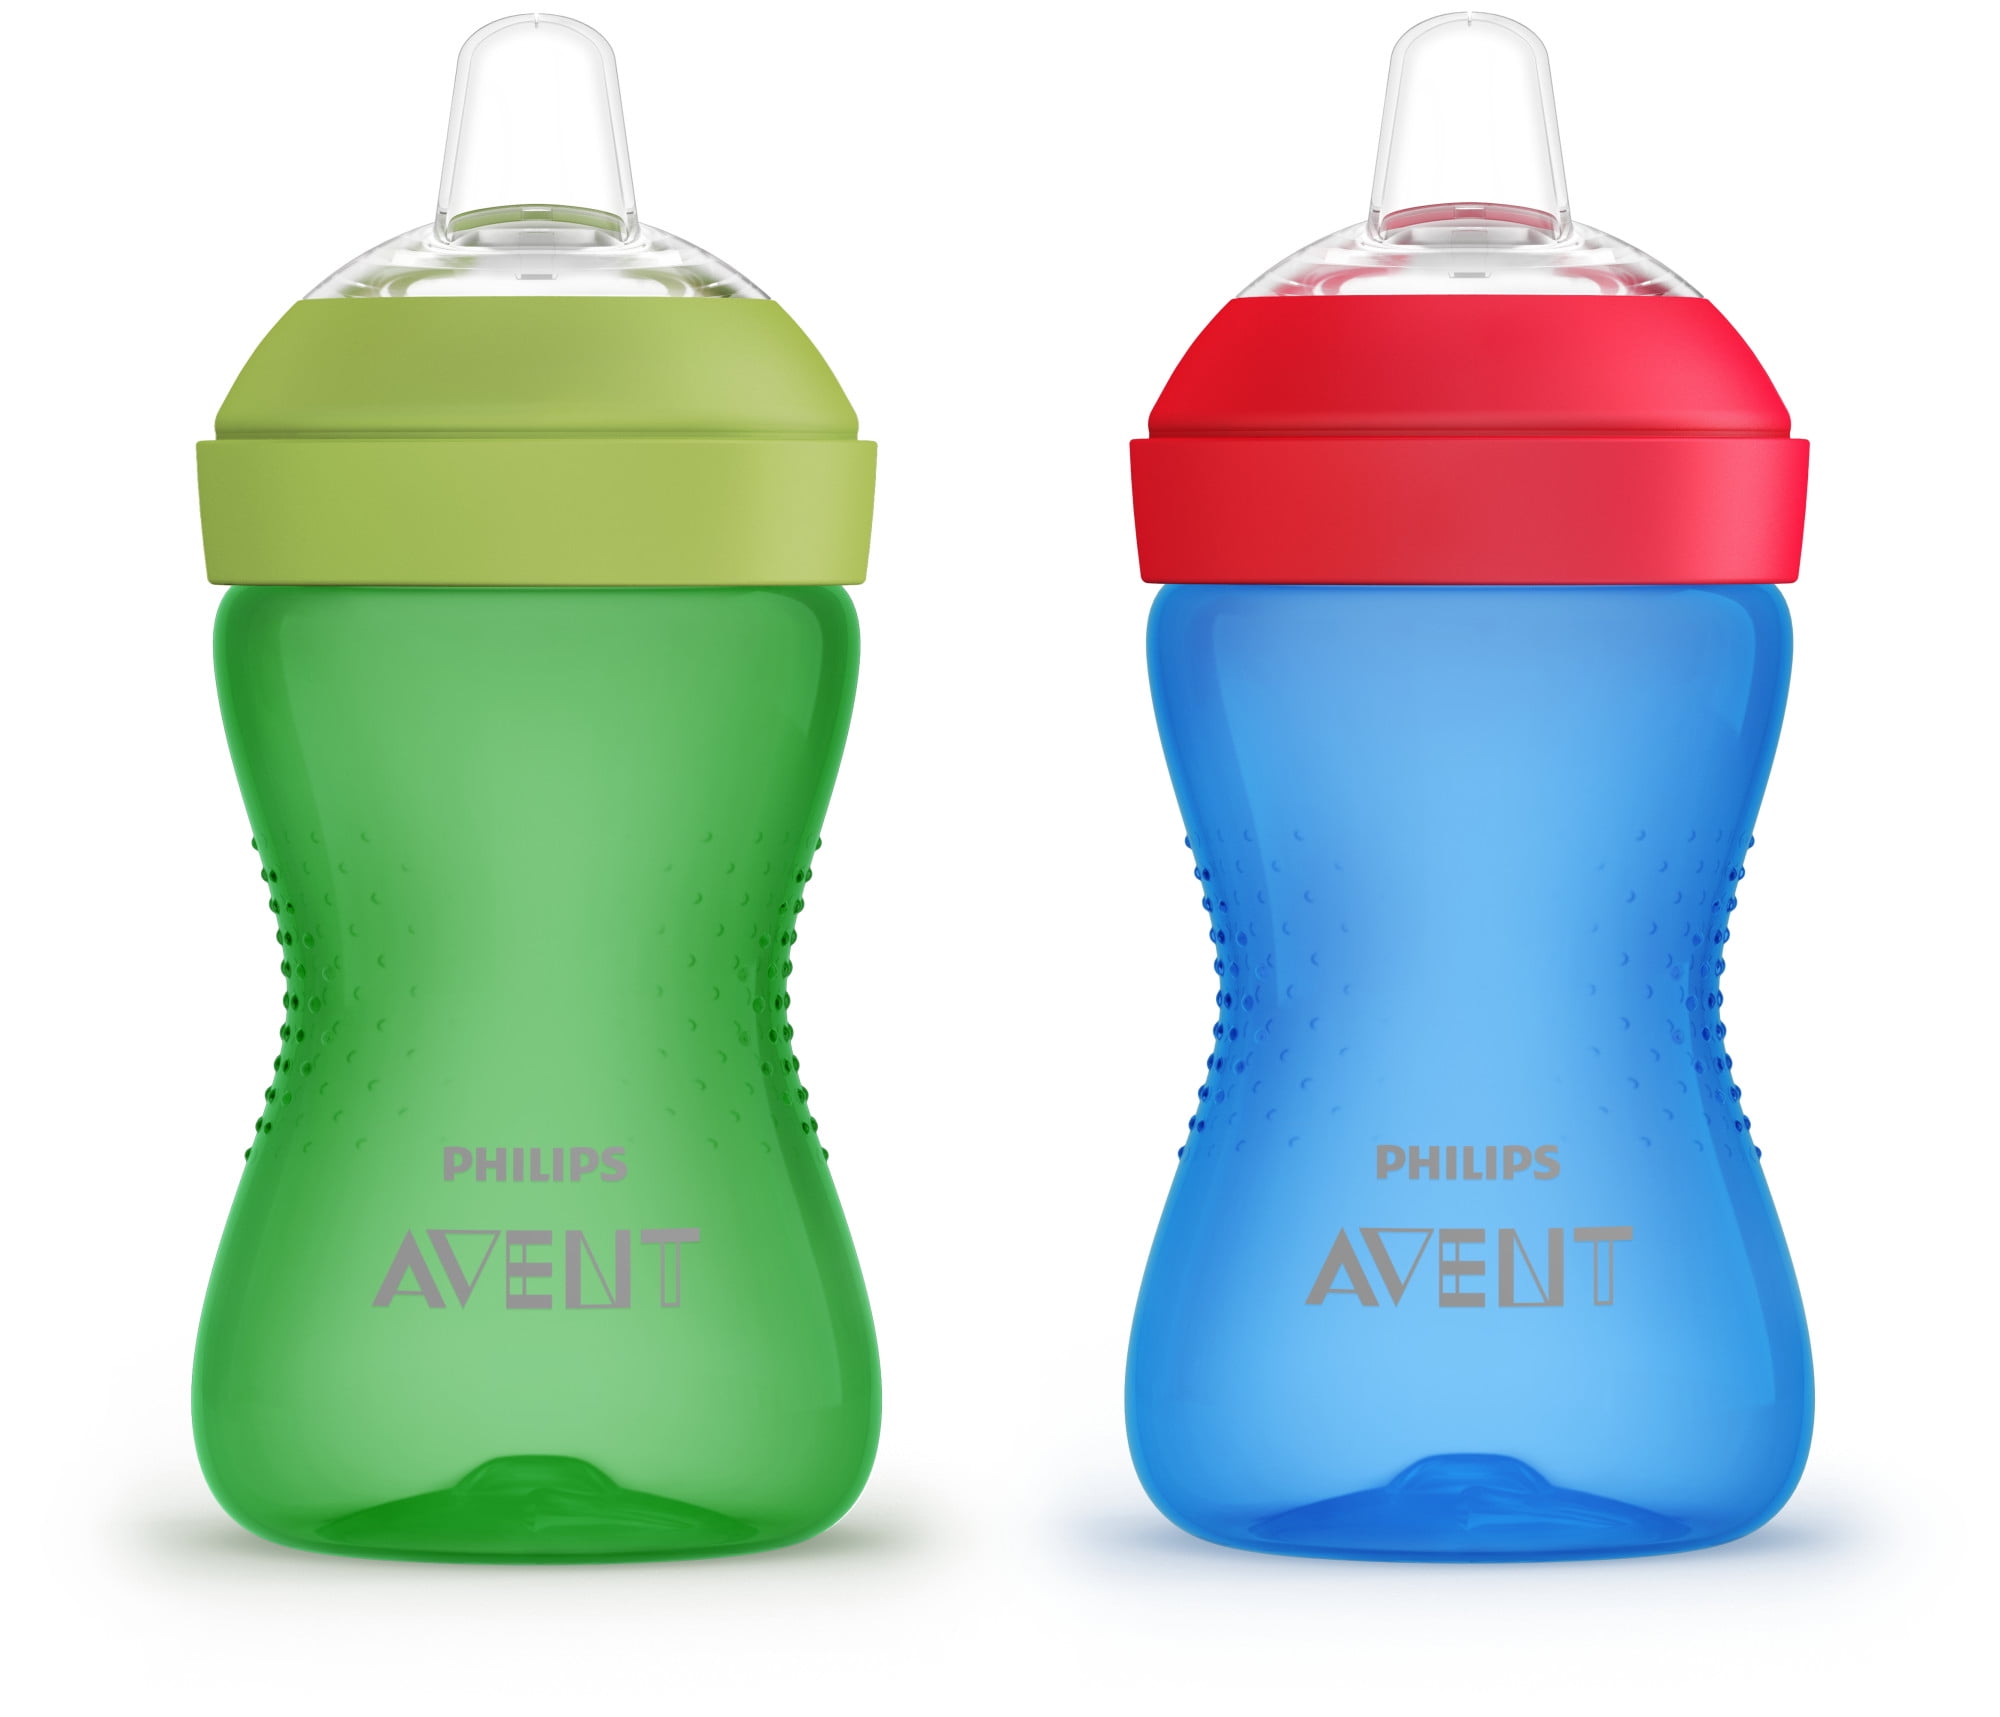 Re-Play Sippy Cups for Toddlers, 2pk 10oz No Spill Sippy Cup, Aqua